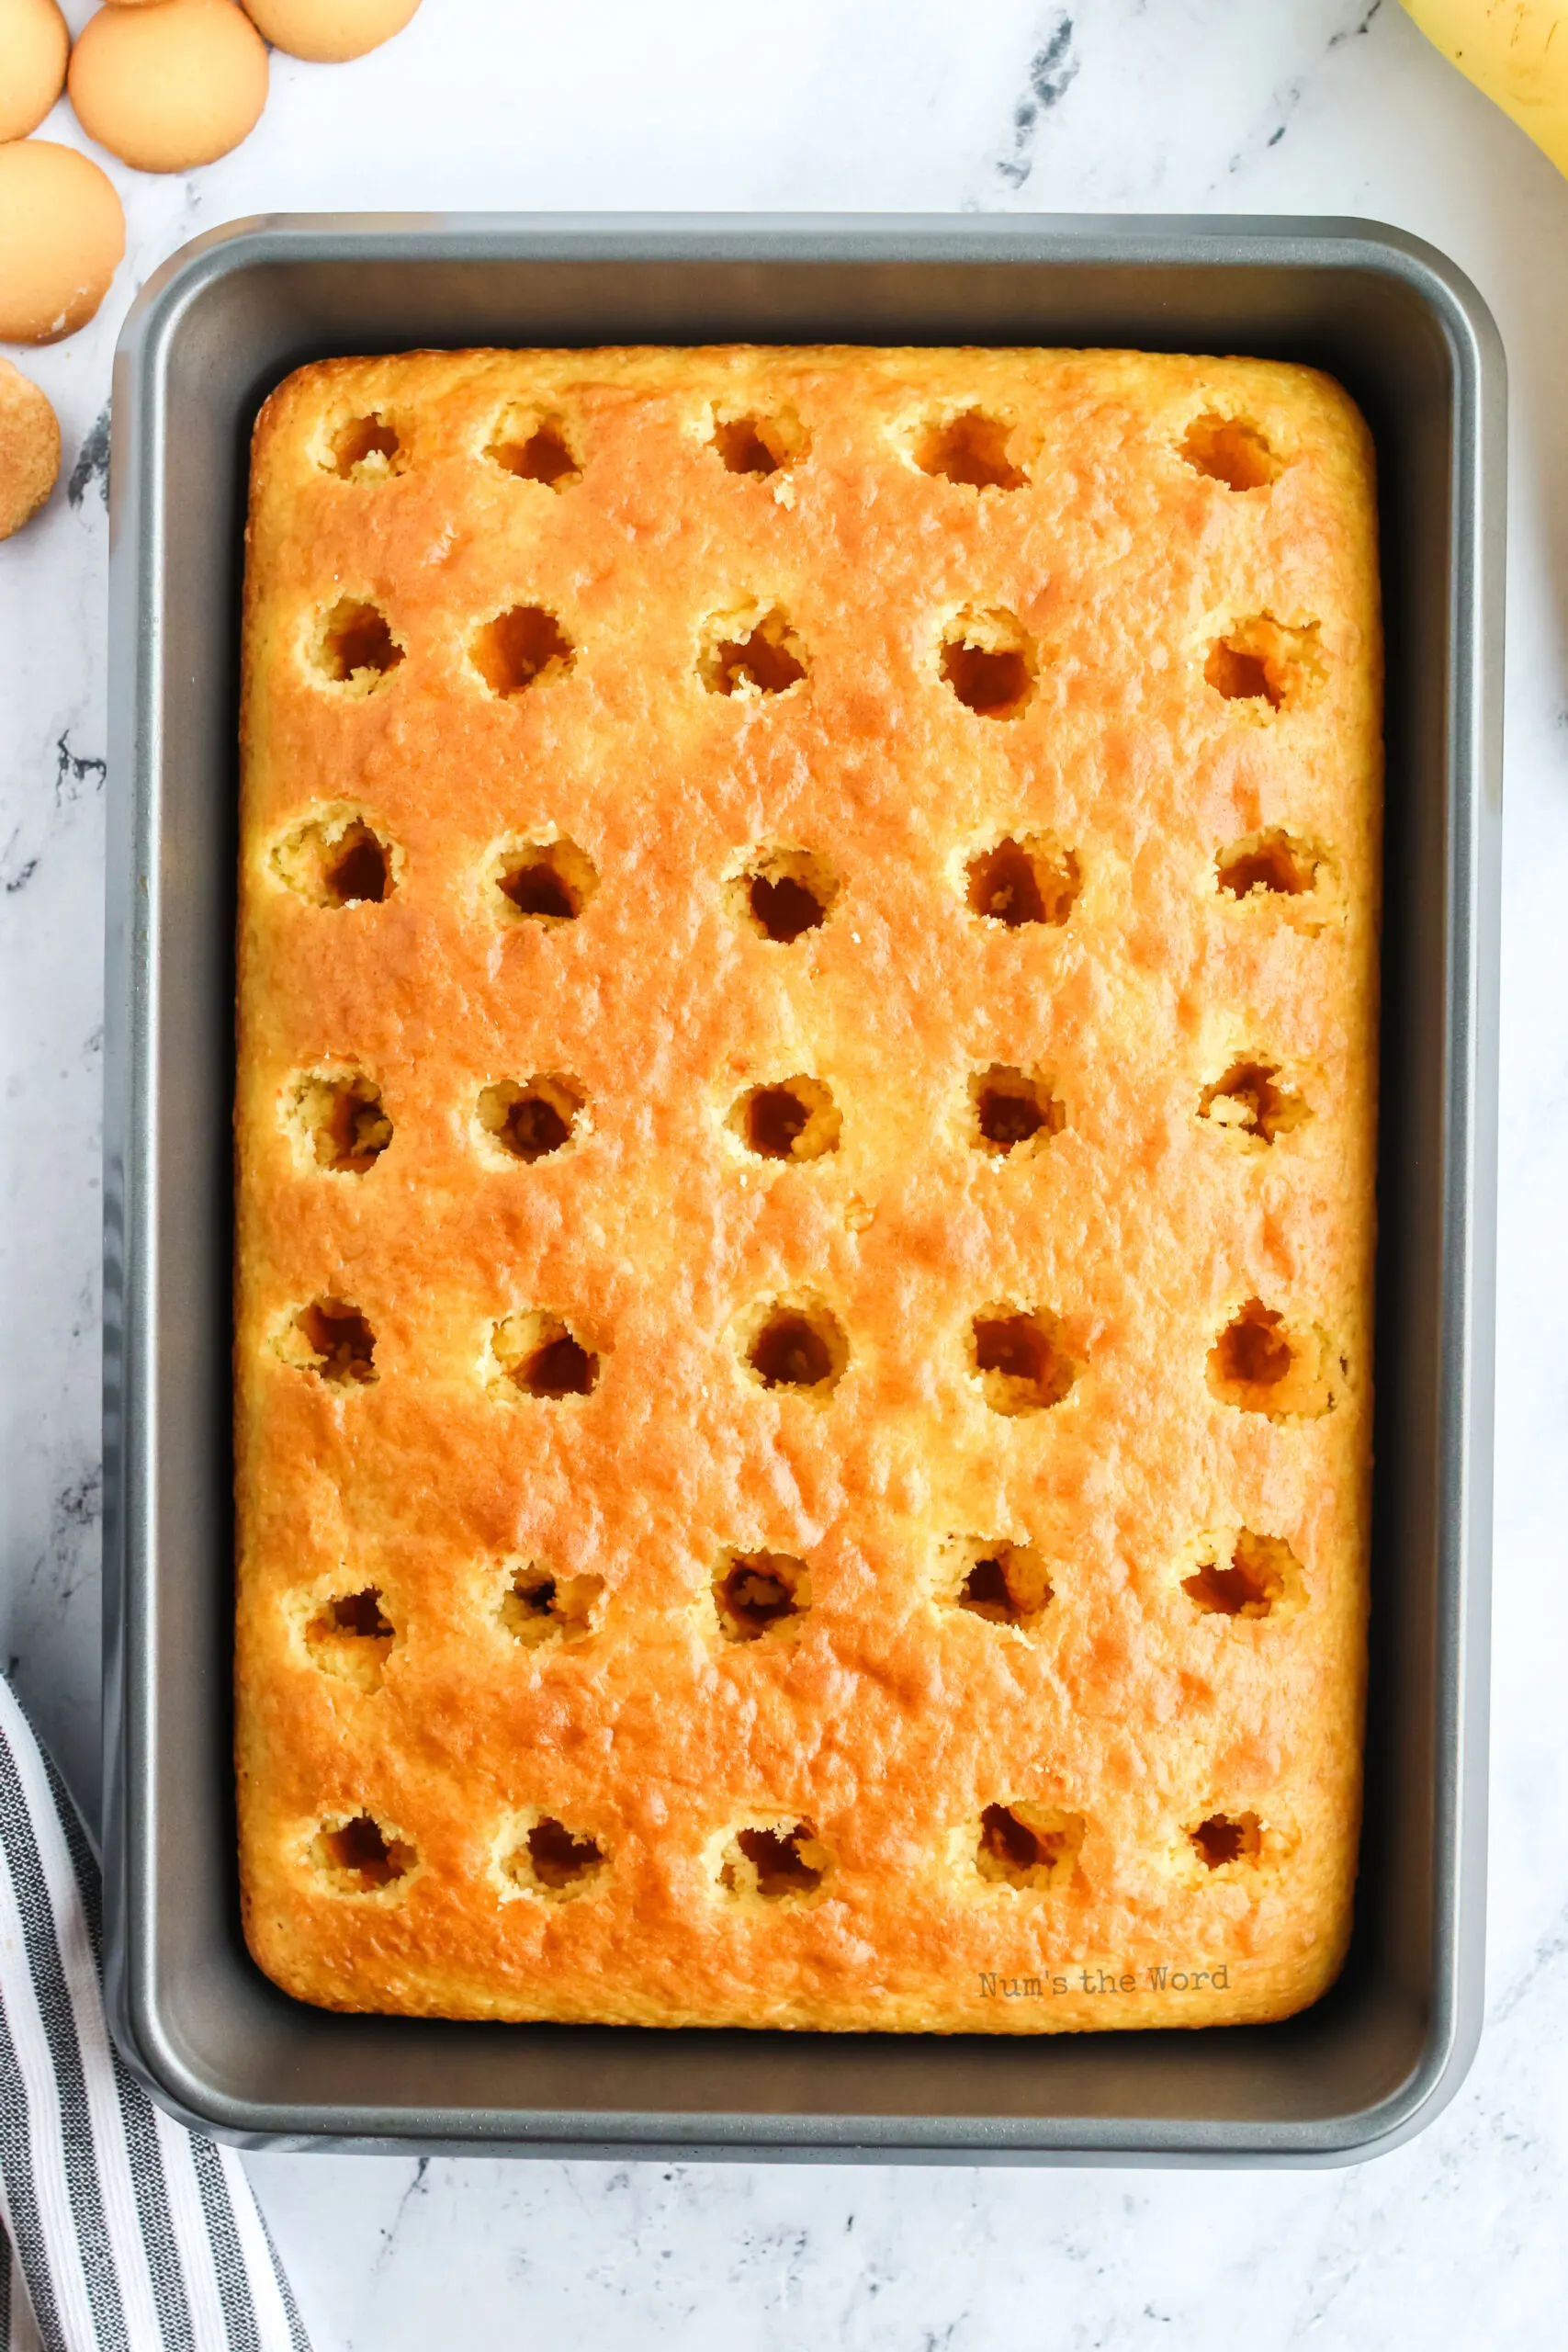 Baked cake with poked holes